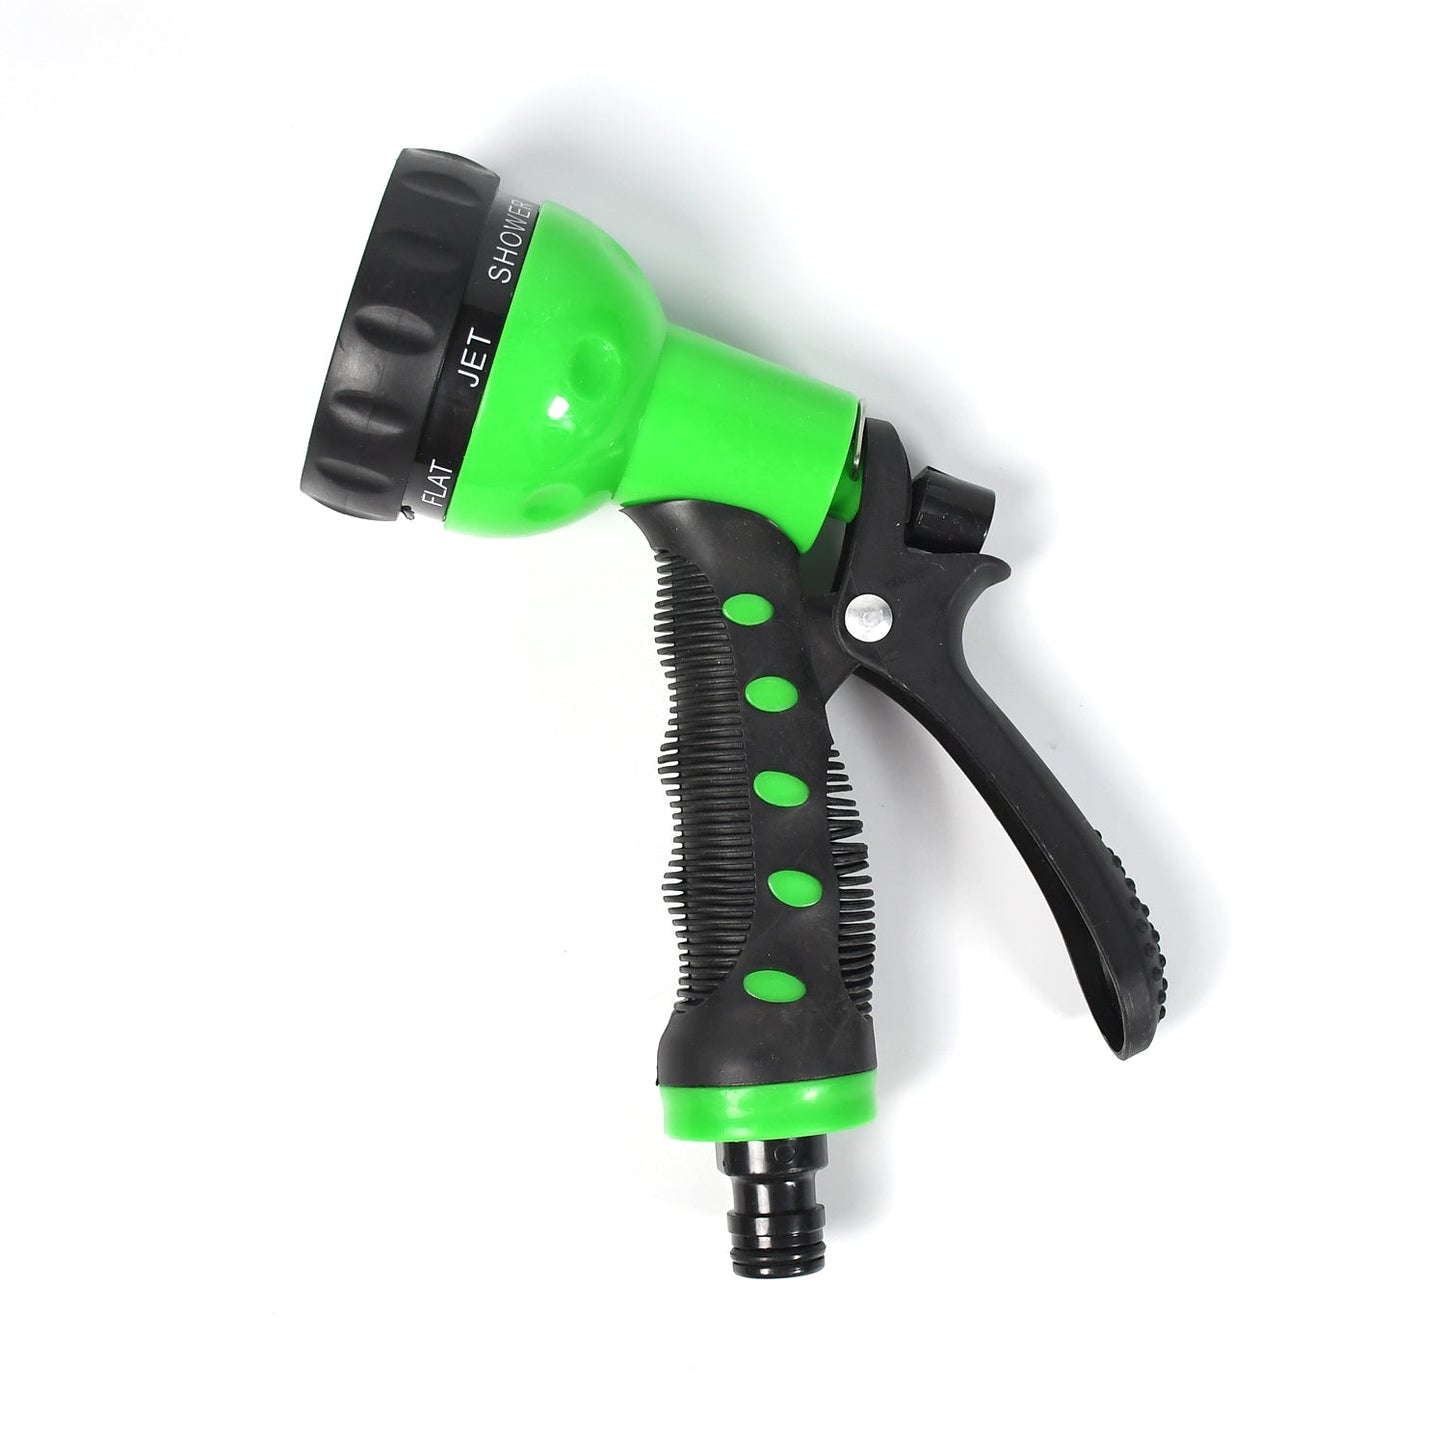 Hose Nozzle Garden Hose Nozzle Hose Spray Nozzle with 8 Adjustable Patterns Front Trigger Hose Sprayer Heavy Duty Metal Water Hose Nozzle for Cleaning, Watering, Washing, Bathing